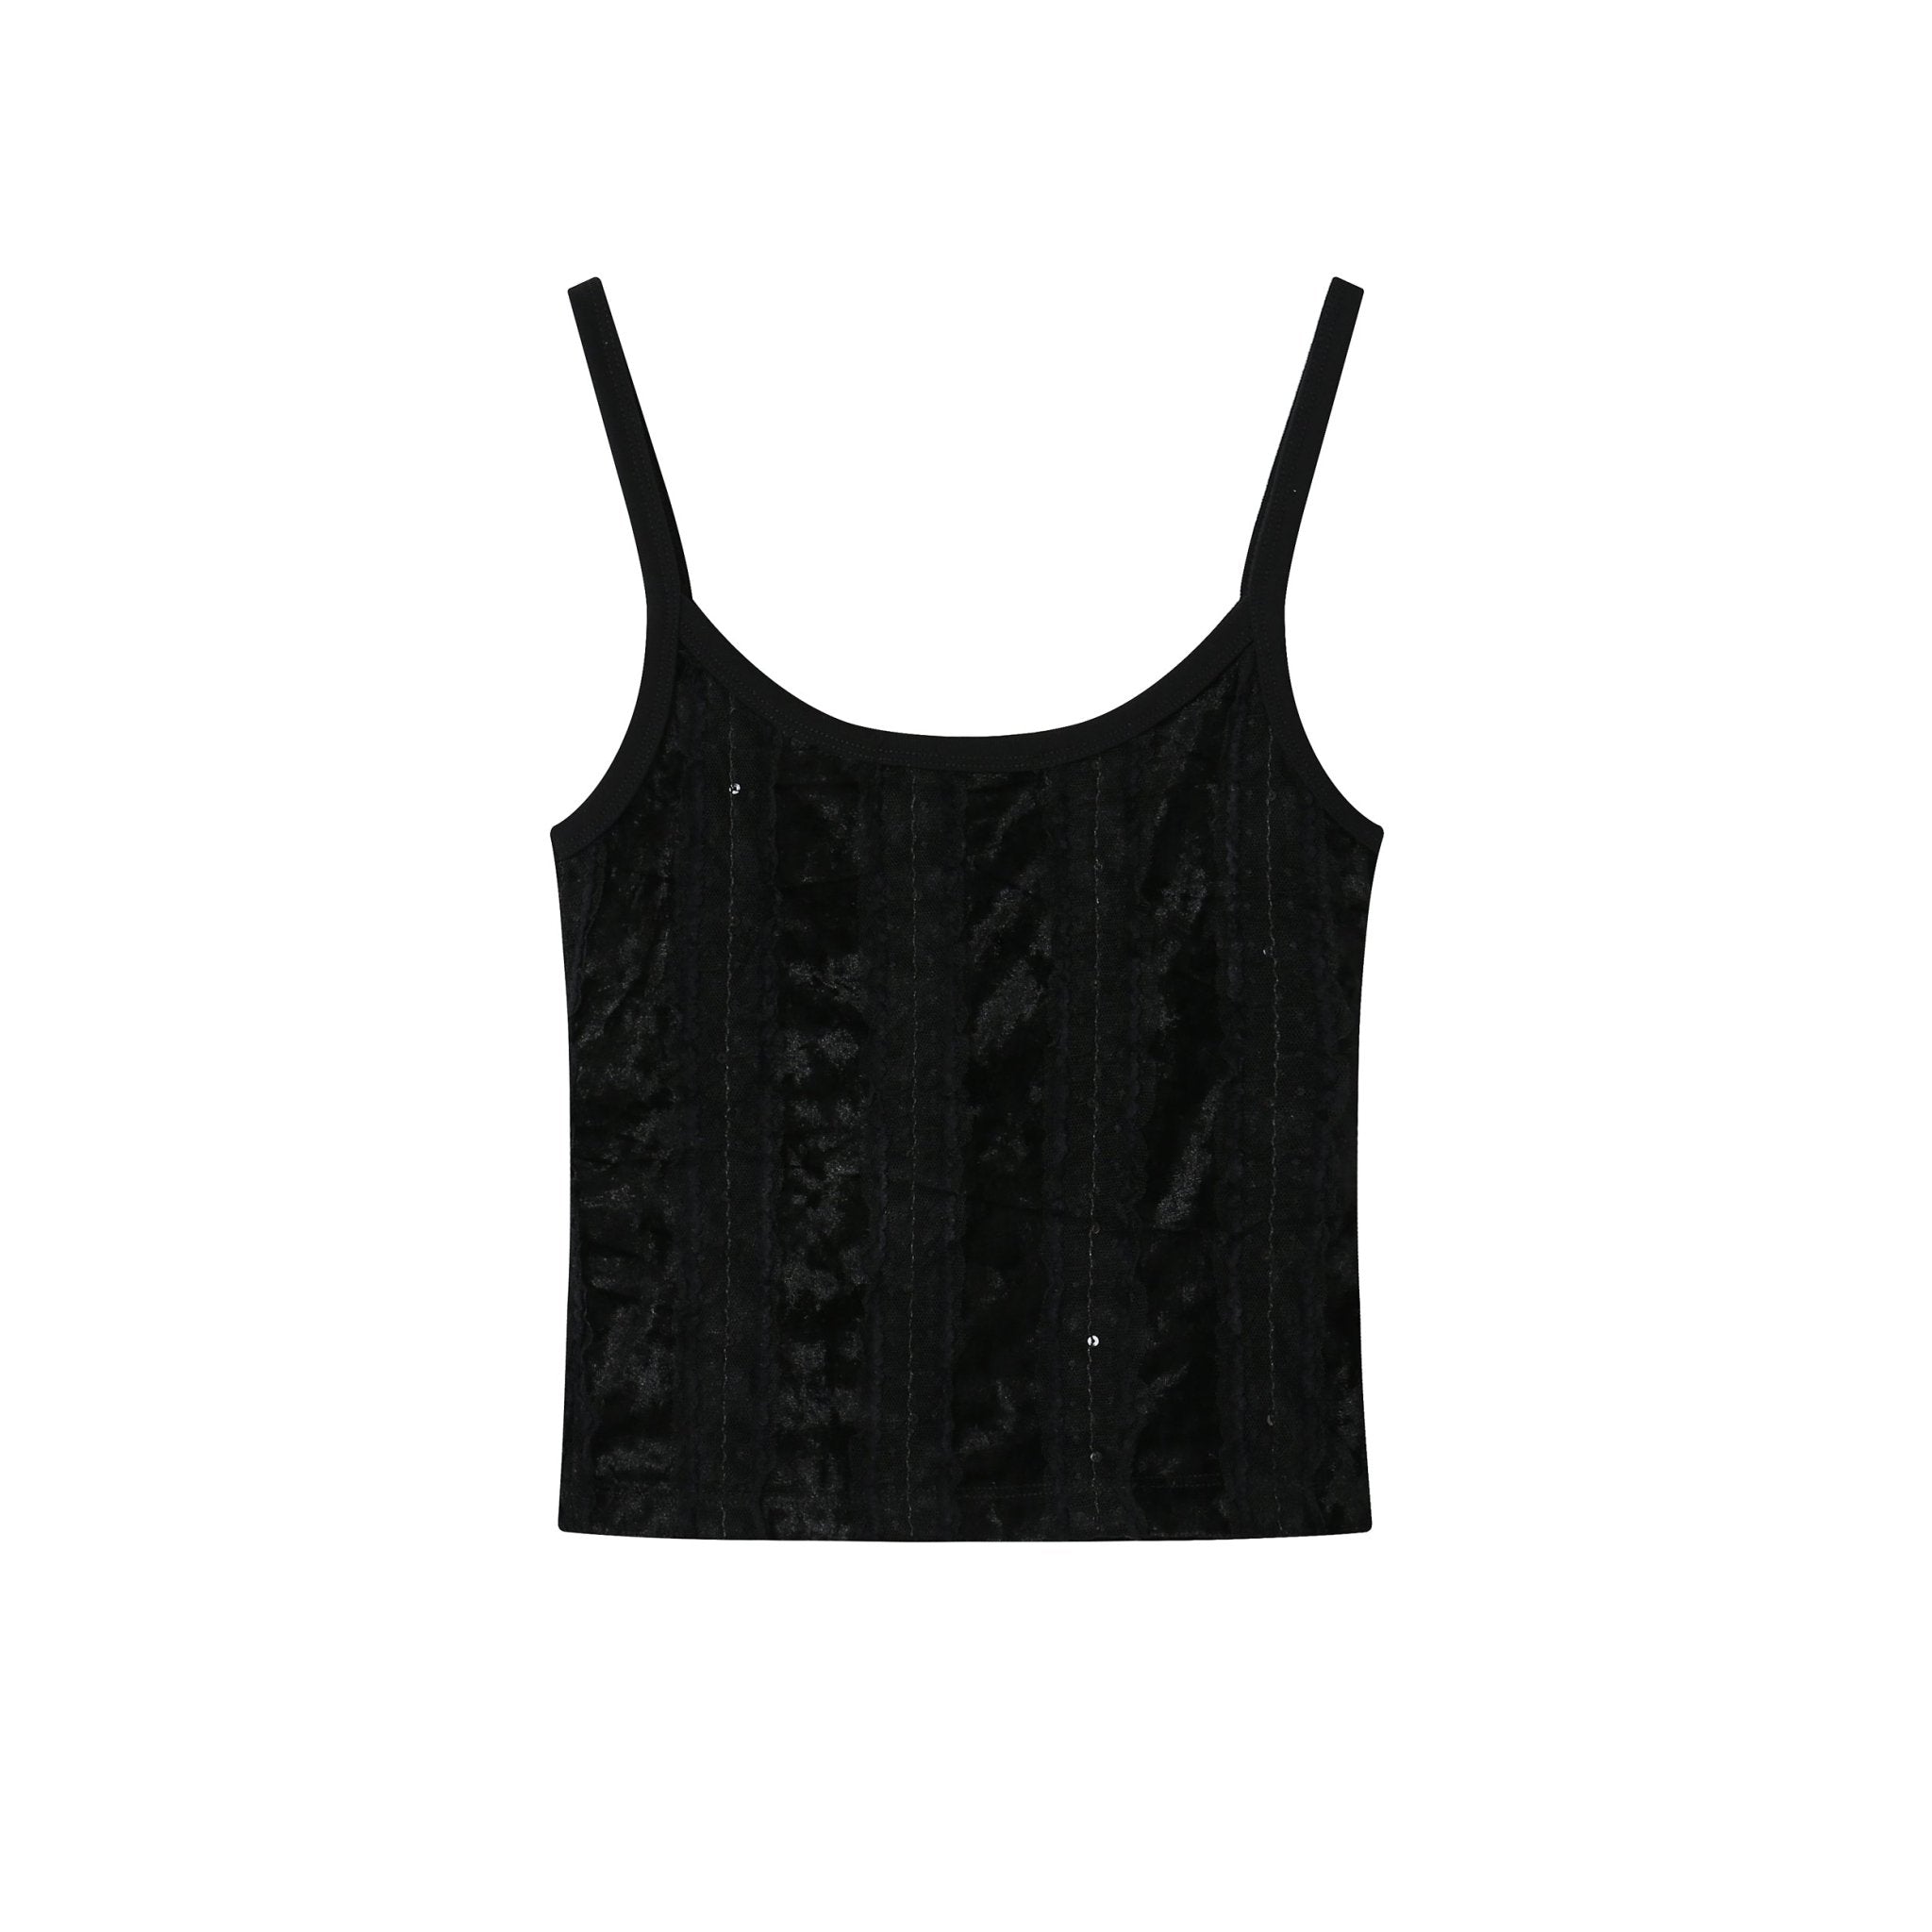 SOMESOWE Black Lace Texture Sling Top | MADA IN CHINA